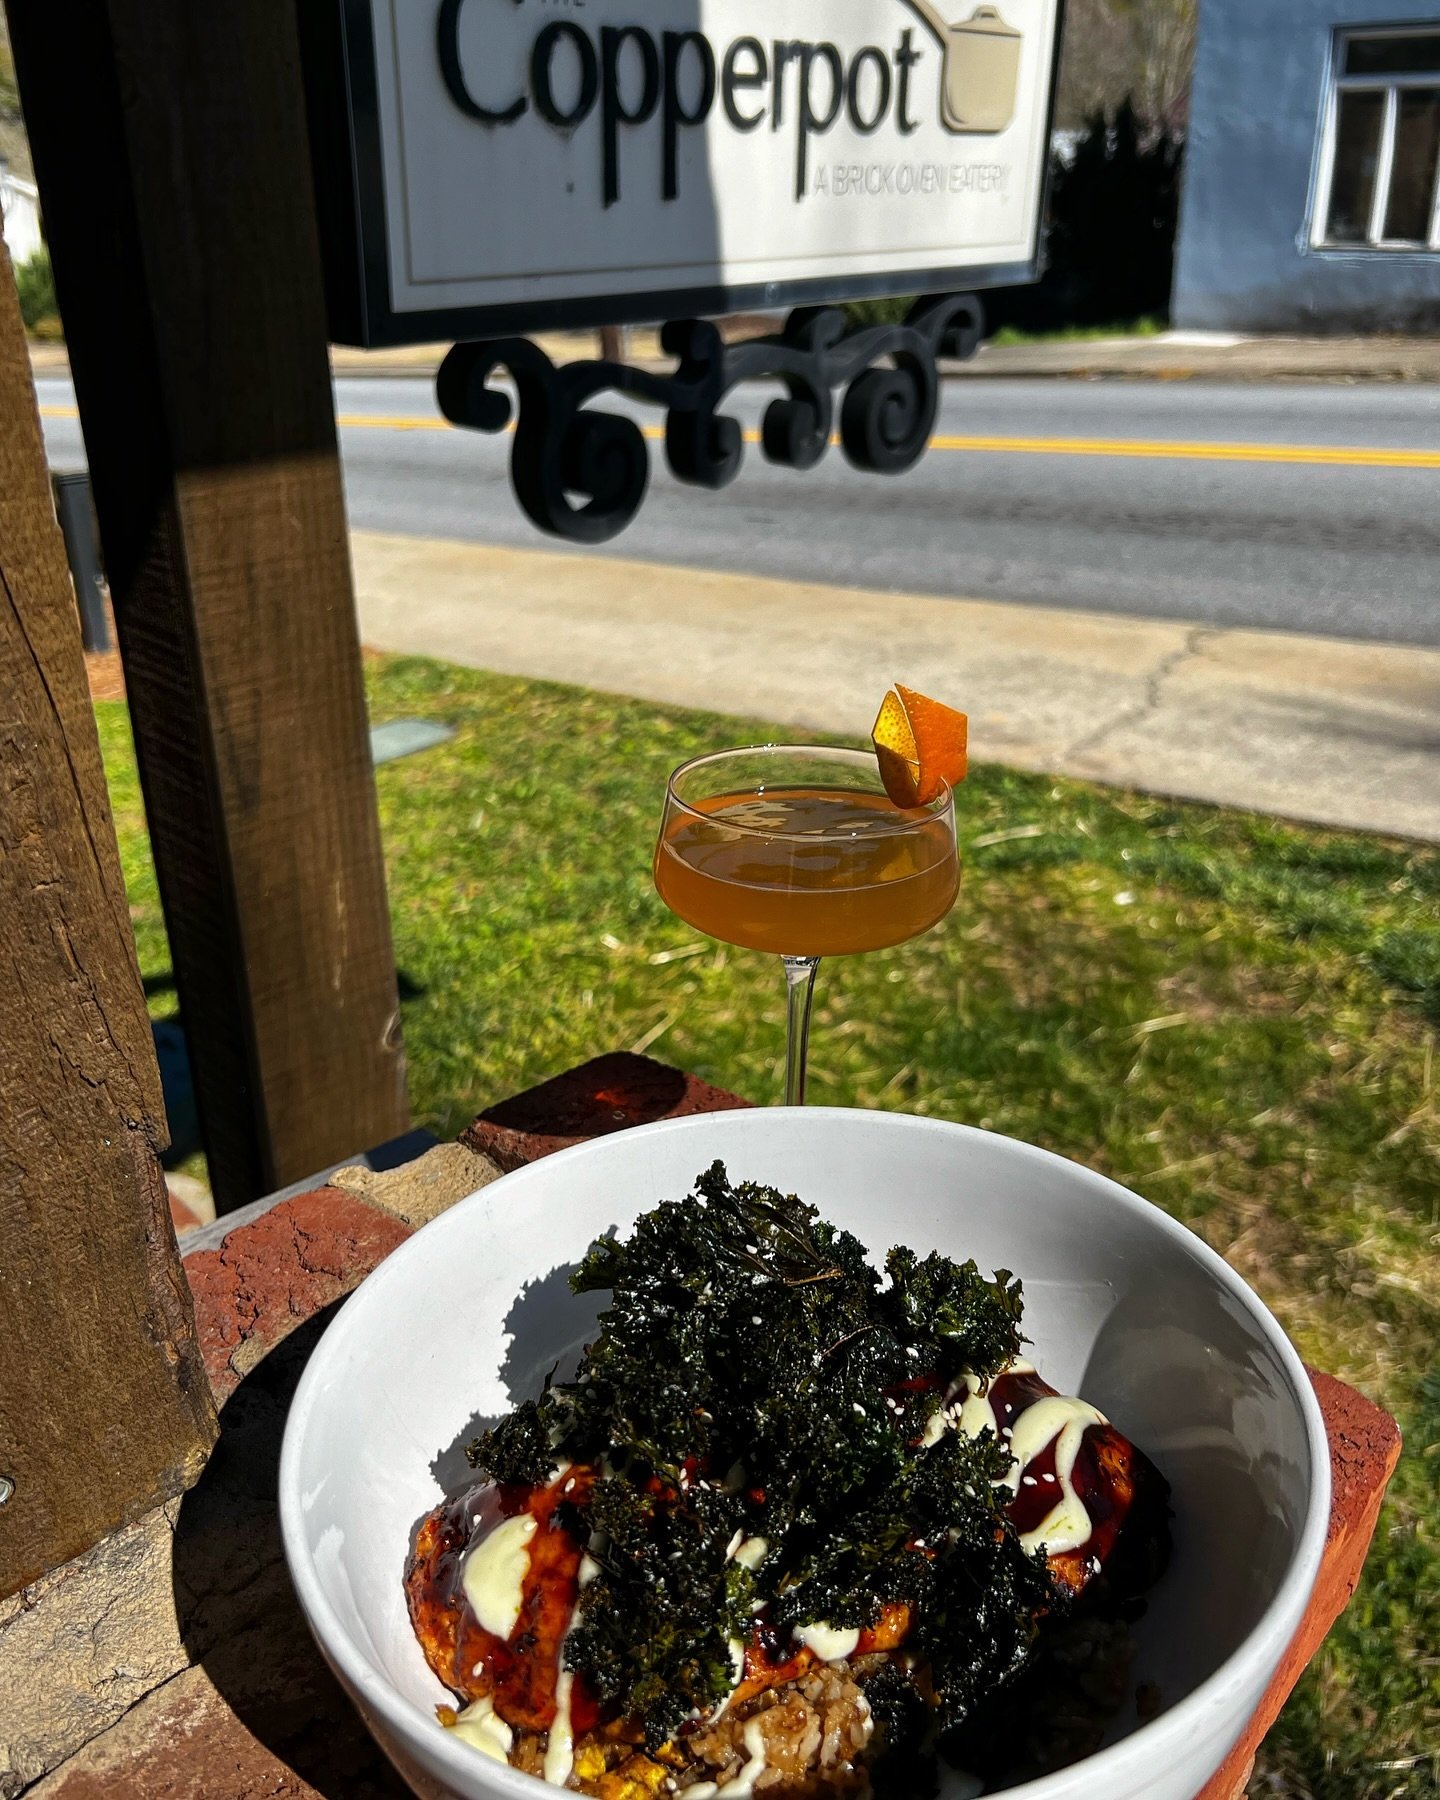 Weekend Special for 4/5
Starts at 5PM and available while supplies last. 
Korean BBQ Grilled Chicken with fried rice, crispy kale and lime aioli. 
Pair it with the Sunlight ☀️a cocktail made with Suntory Whisky, Amaro Montenegro, Lemon, Blood Orange 